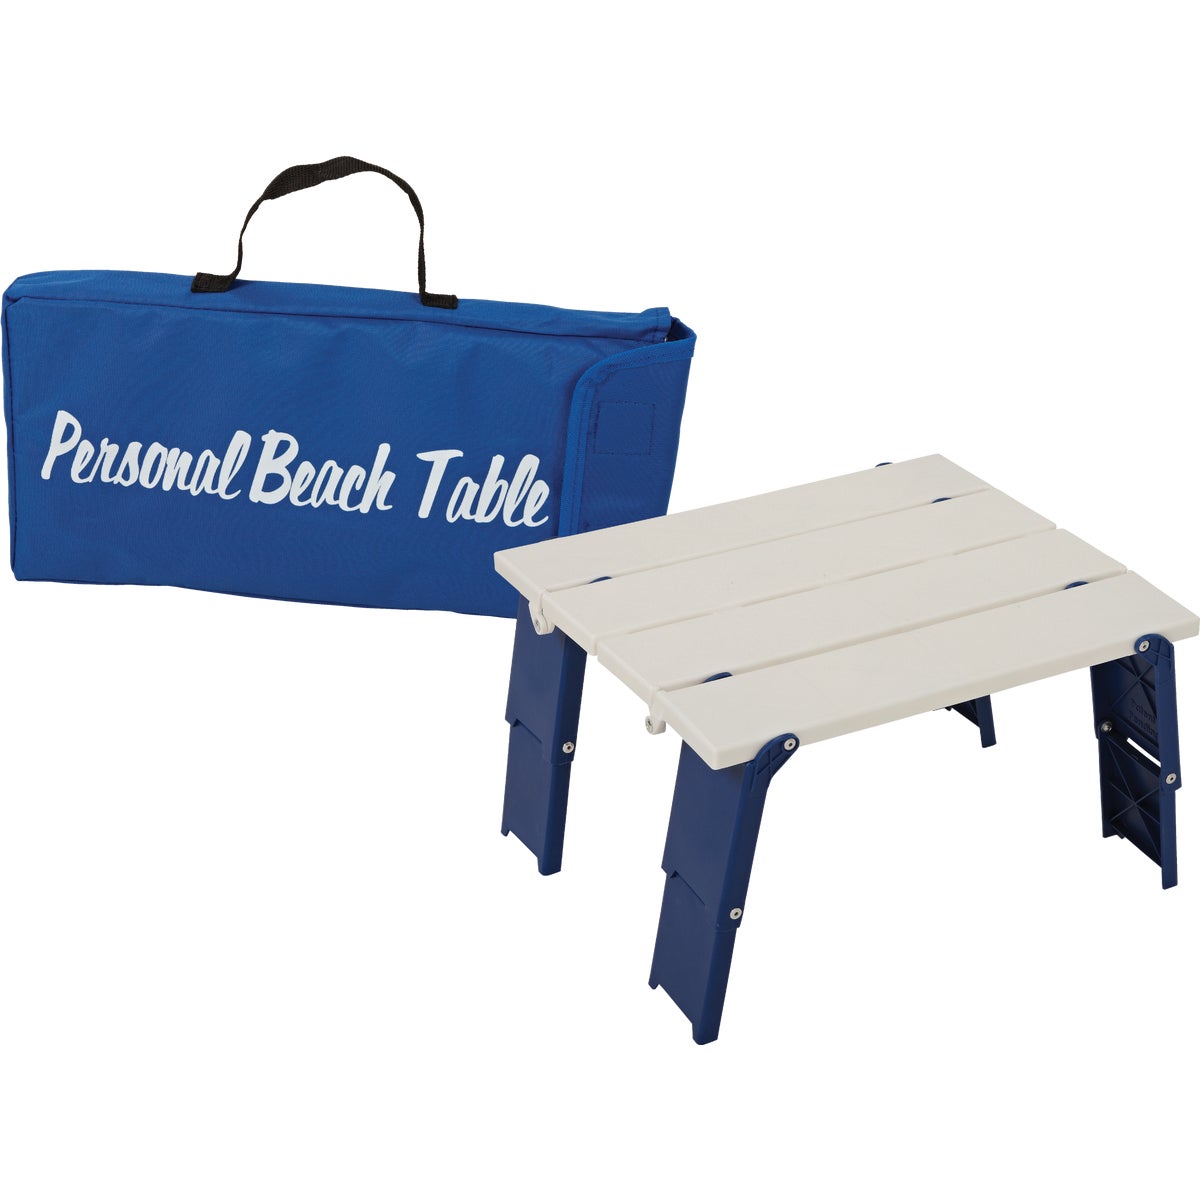 PERSONAL BEACH TABLE